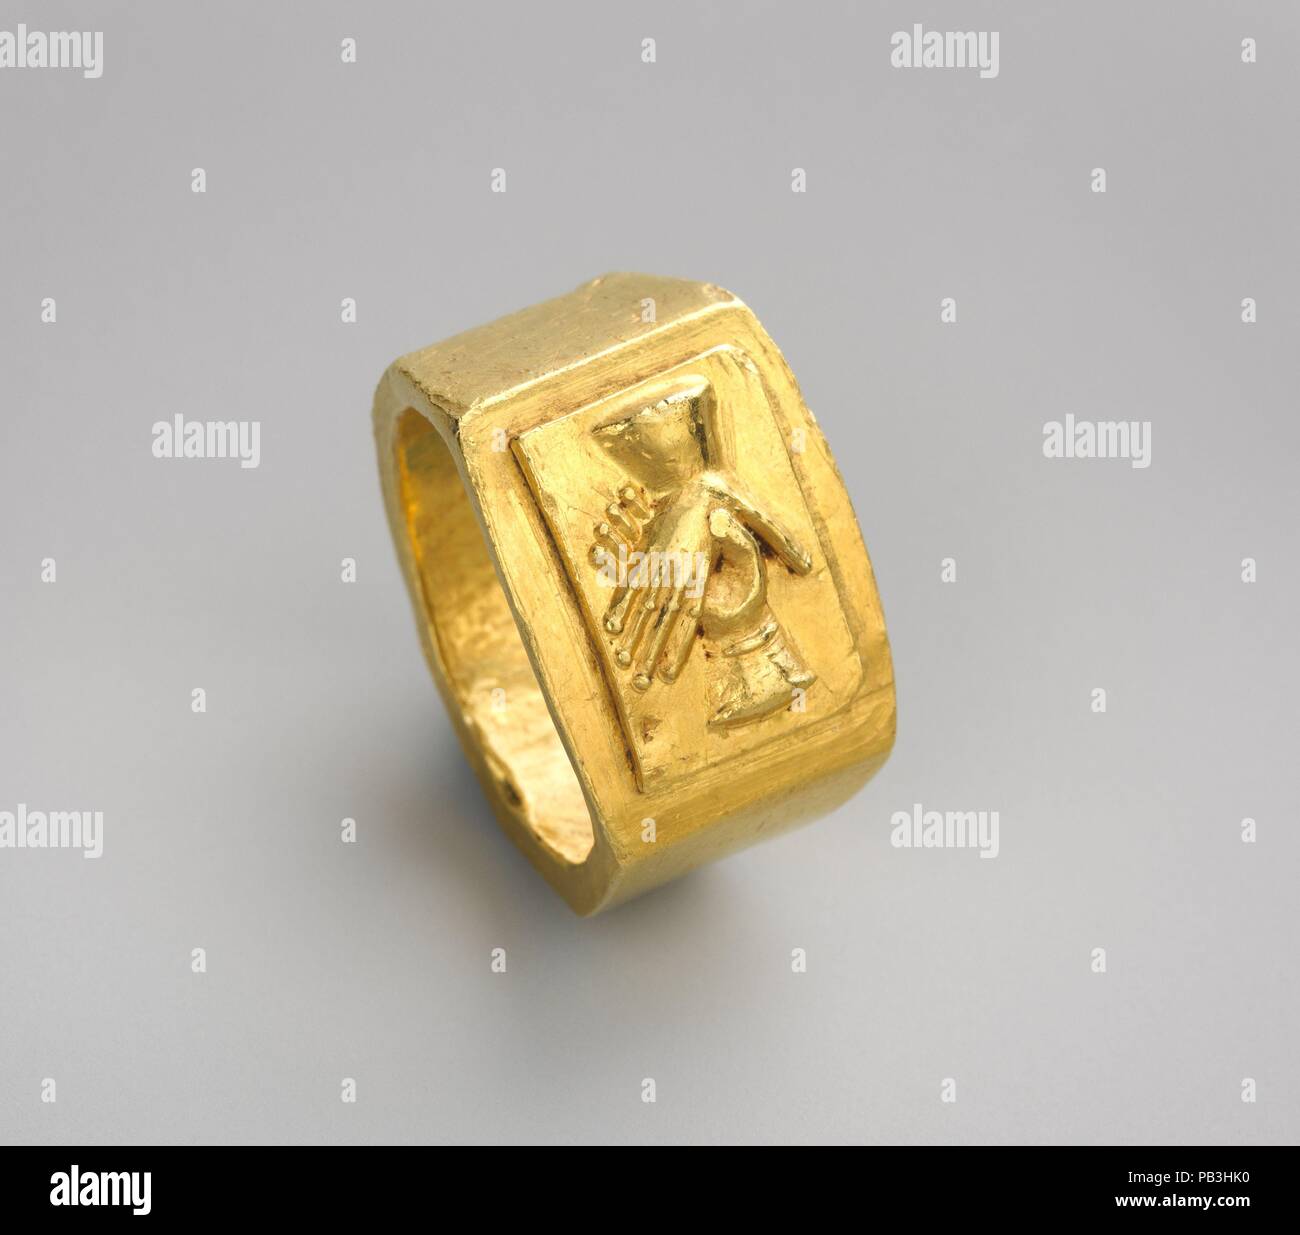 Gold finger ring. Culture: Roman. Dimensions: 1/2 × 3/4 in., 0.499oz. (1.3 × 1.9 cm, 14.15g)  Other (Bezel): 7/16 × 5/16 in. (1.2 × 0.8 cm). Date: 3rd century A.D..  This impressive ring was used as a betrothal or wedding band--a tradition that only became firmly established in the third century A.D. The small size of the hoop suggests that it was given to a young fiancée or bride, but its weight implies that the couple was able to afford valuable pieces of gold jewelry. Museum: Metropolitan Museum of Art, New York, USA. Stock Photo